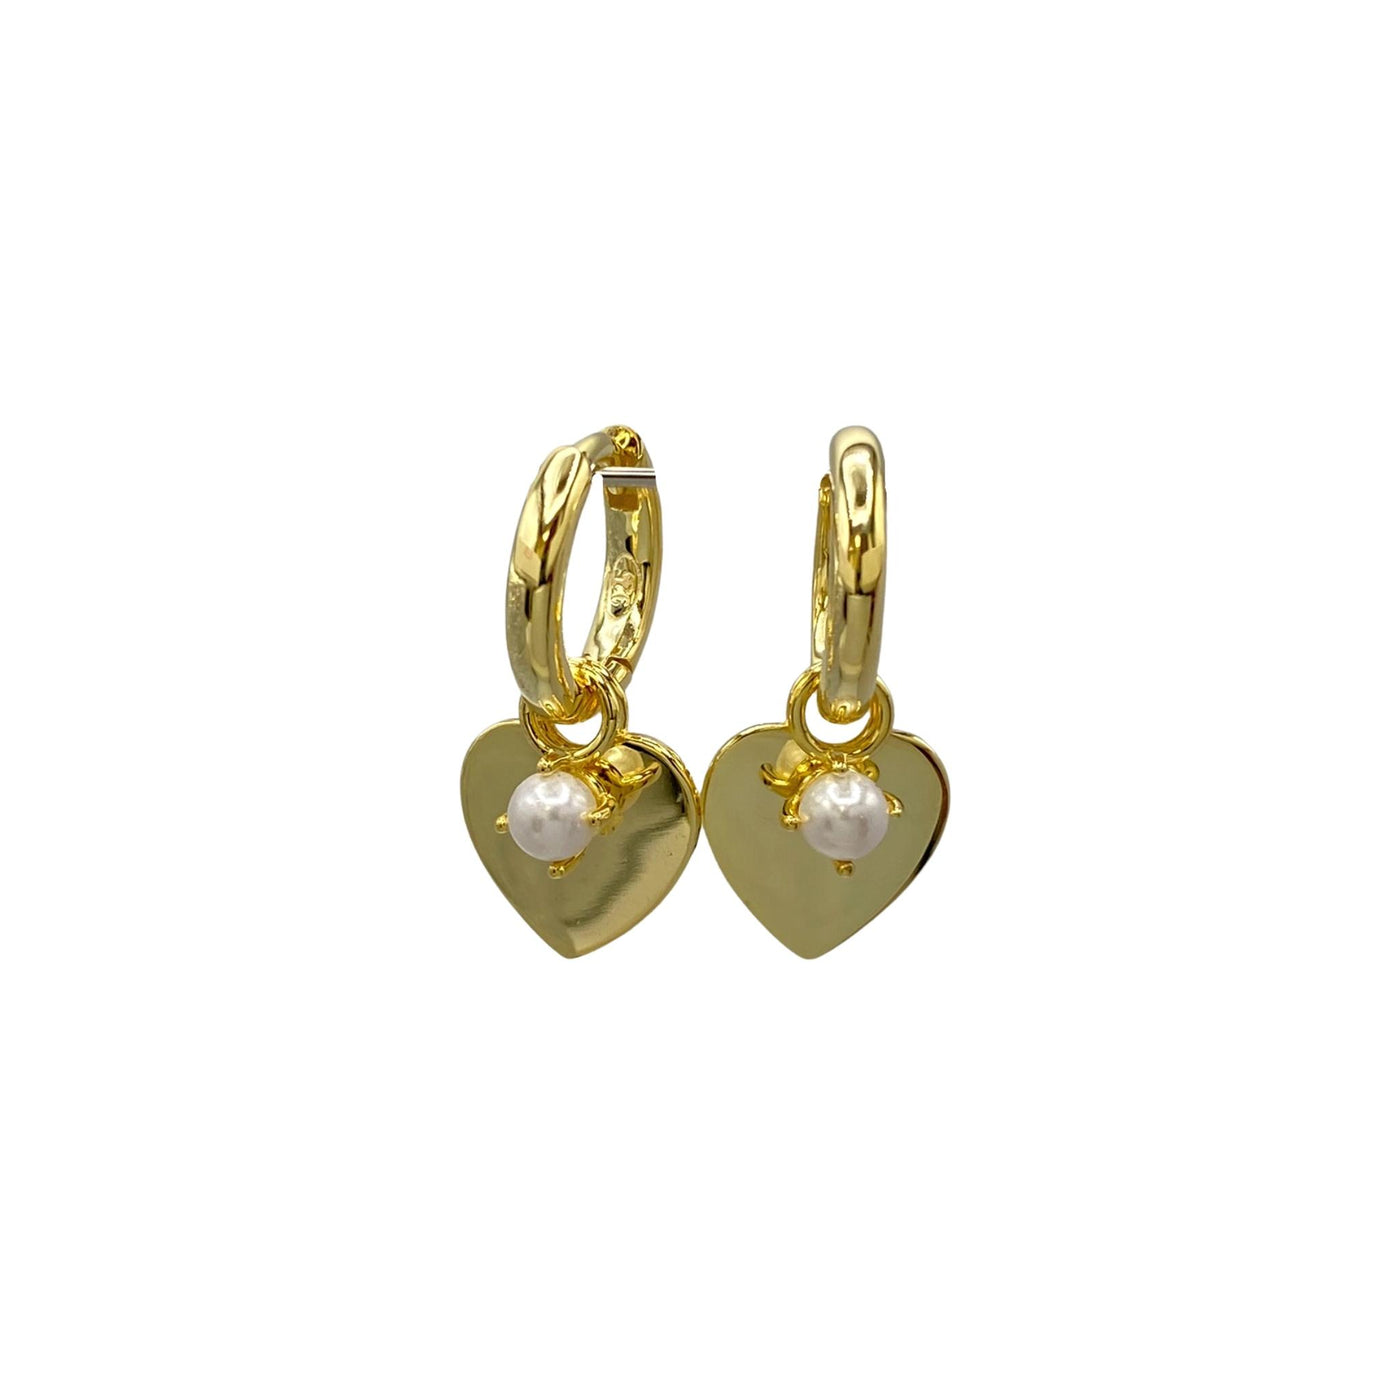 Silver hoop earrings with hearts and pearl charms